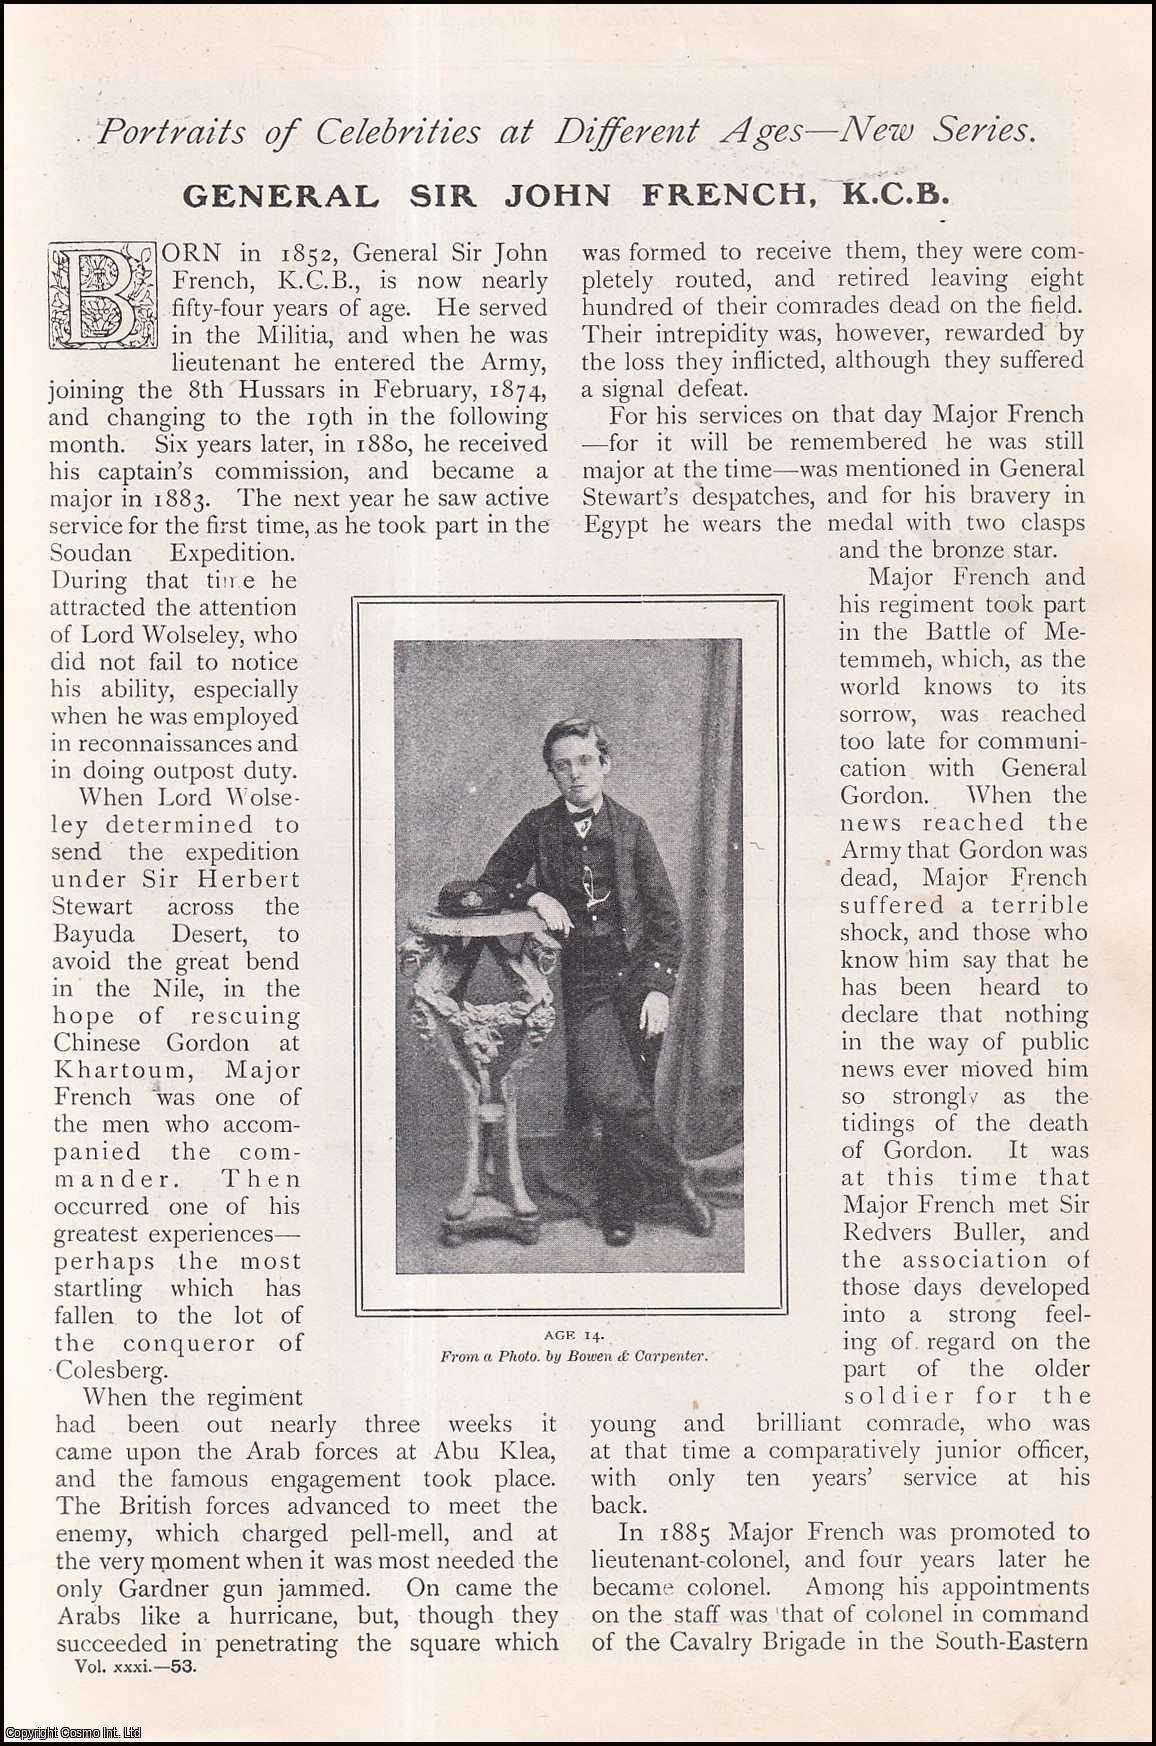 --- - General Sir John French, K.C.B. Portraits of Celebrities at Different Ages: A rare original article from The Strand Magazine, 1906.